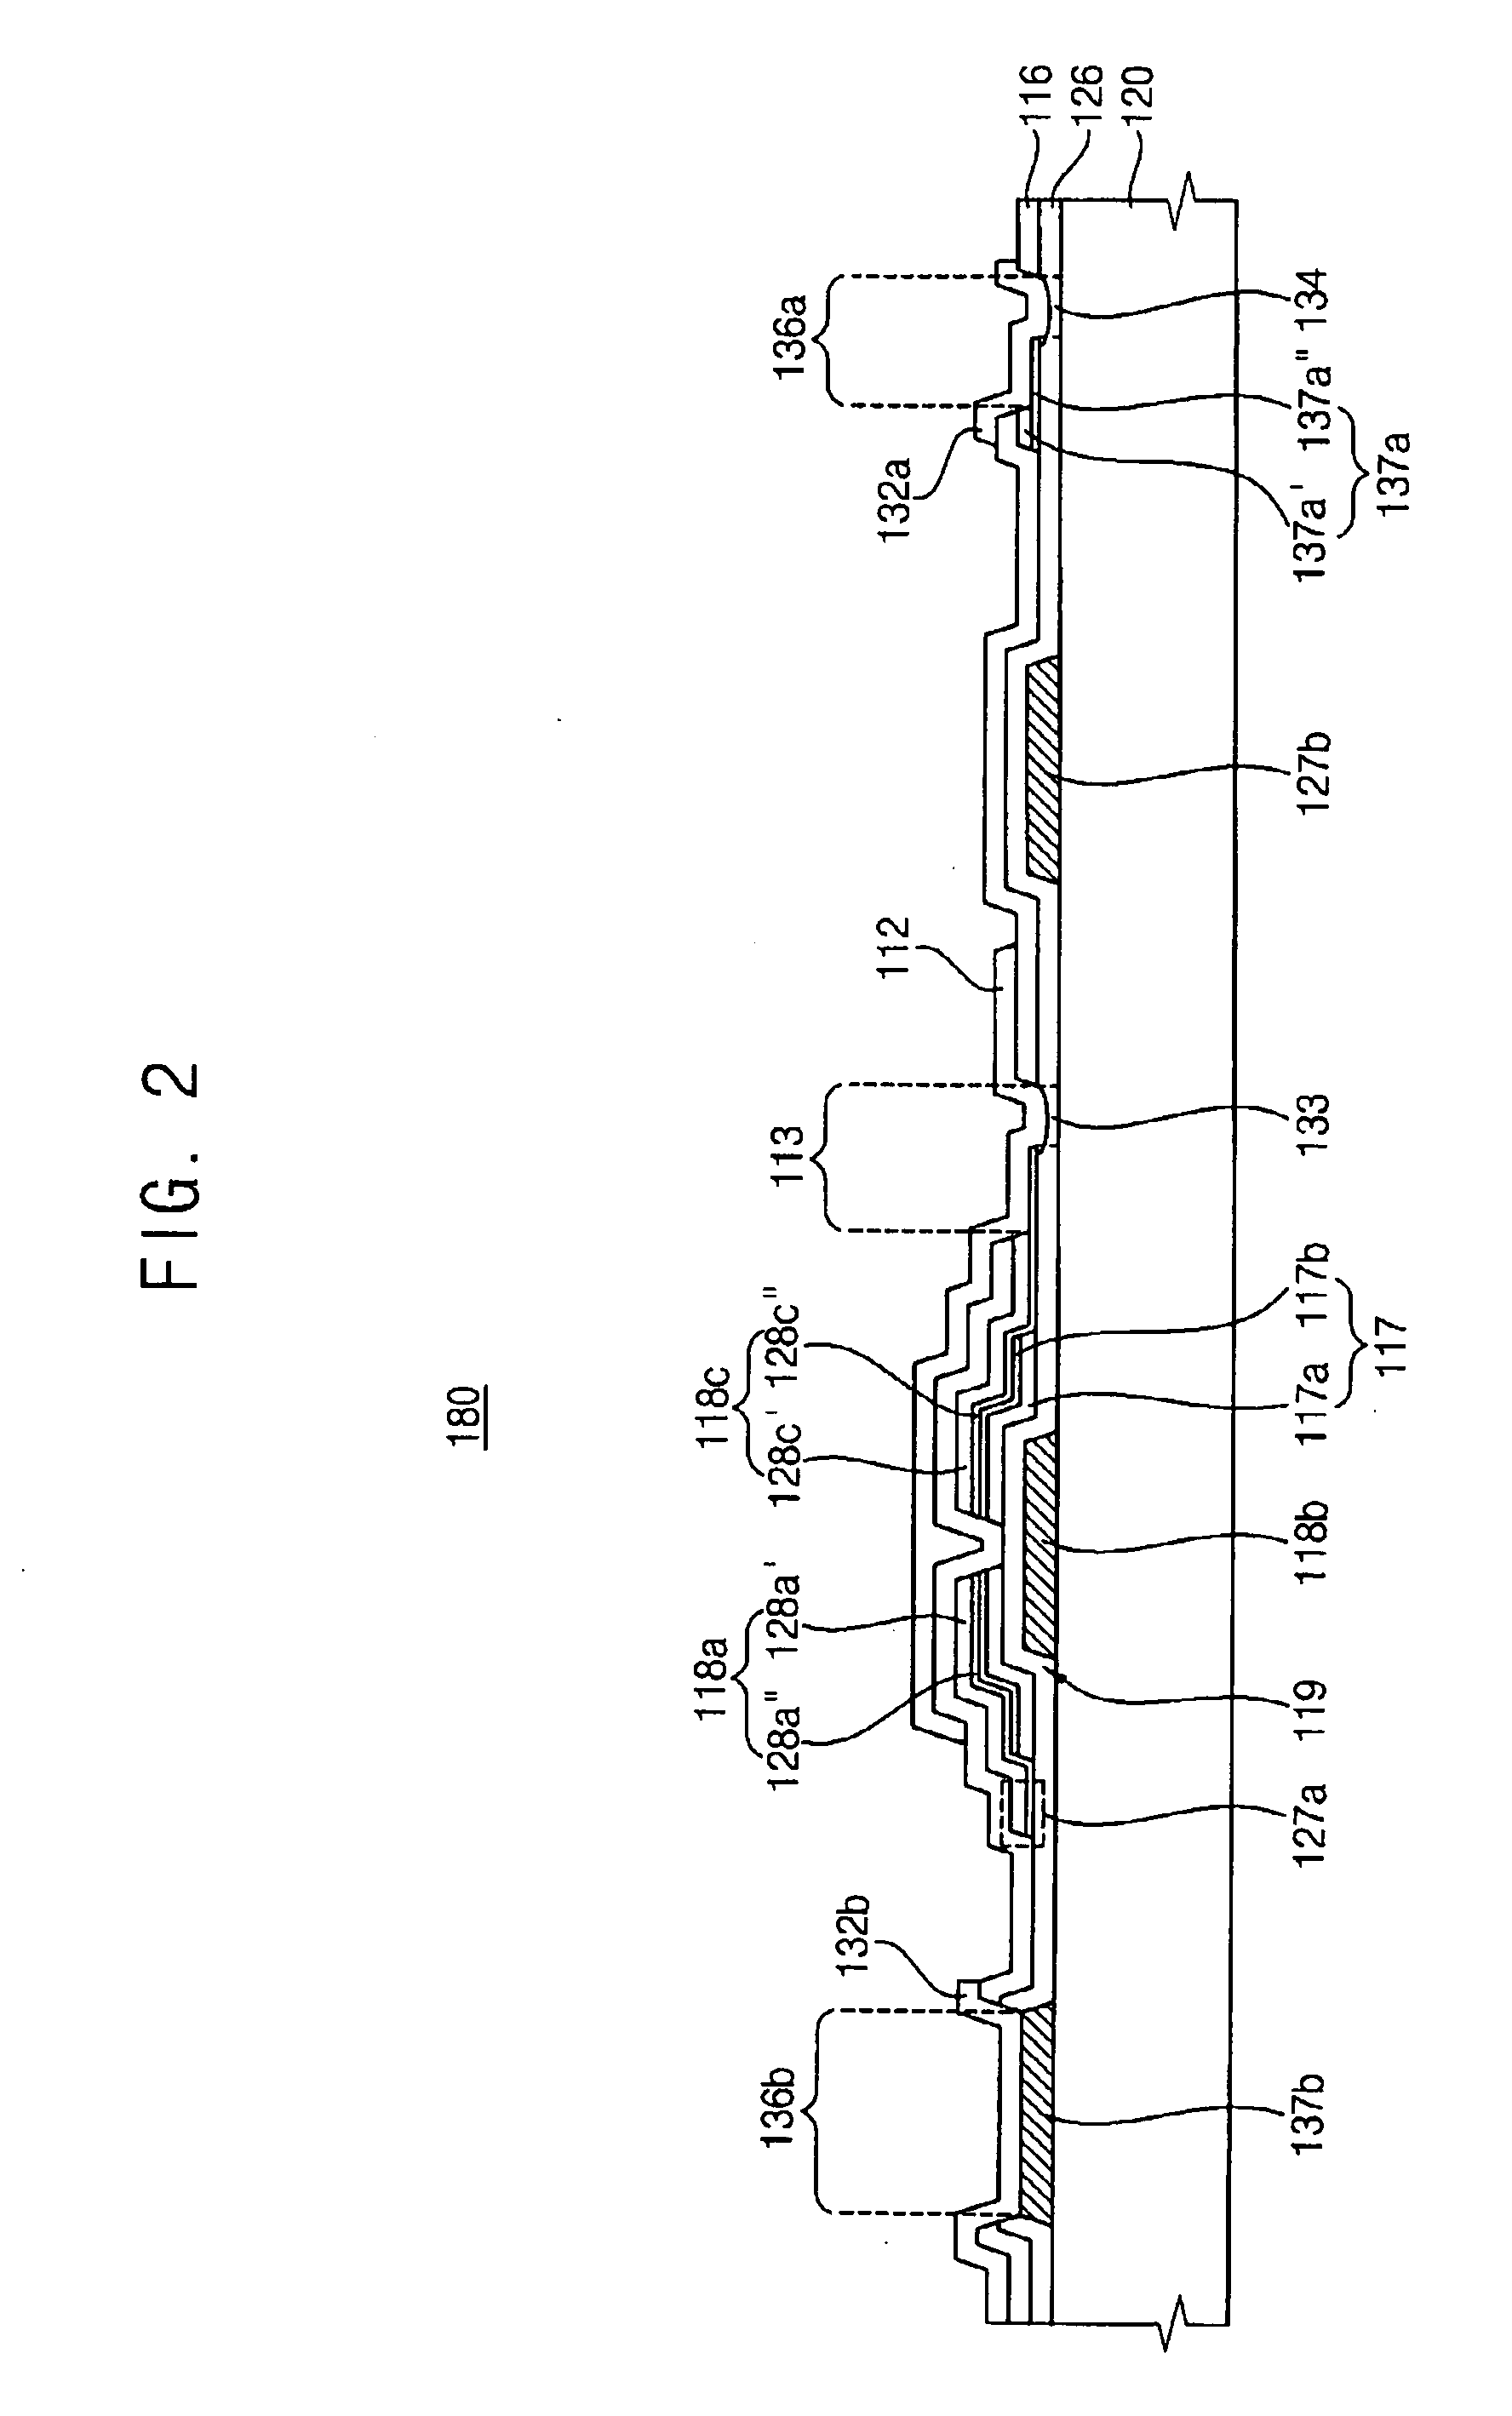 Display substrate, method of manufacturing the same and display device having the same